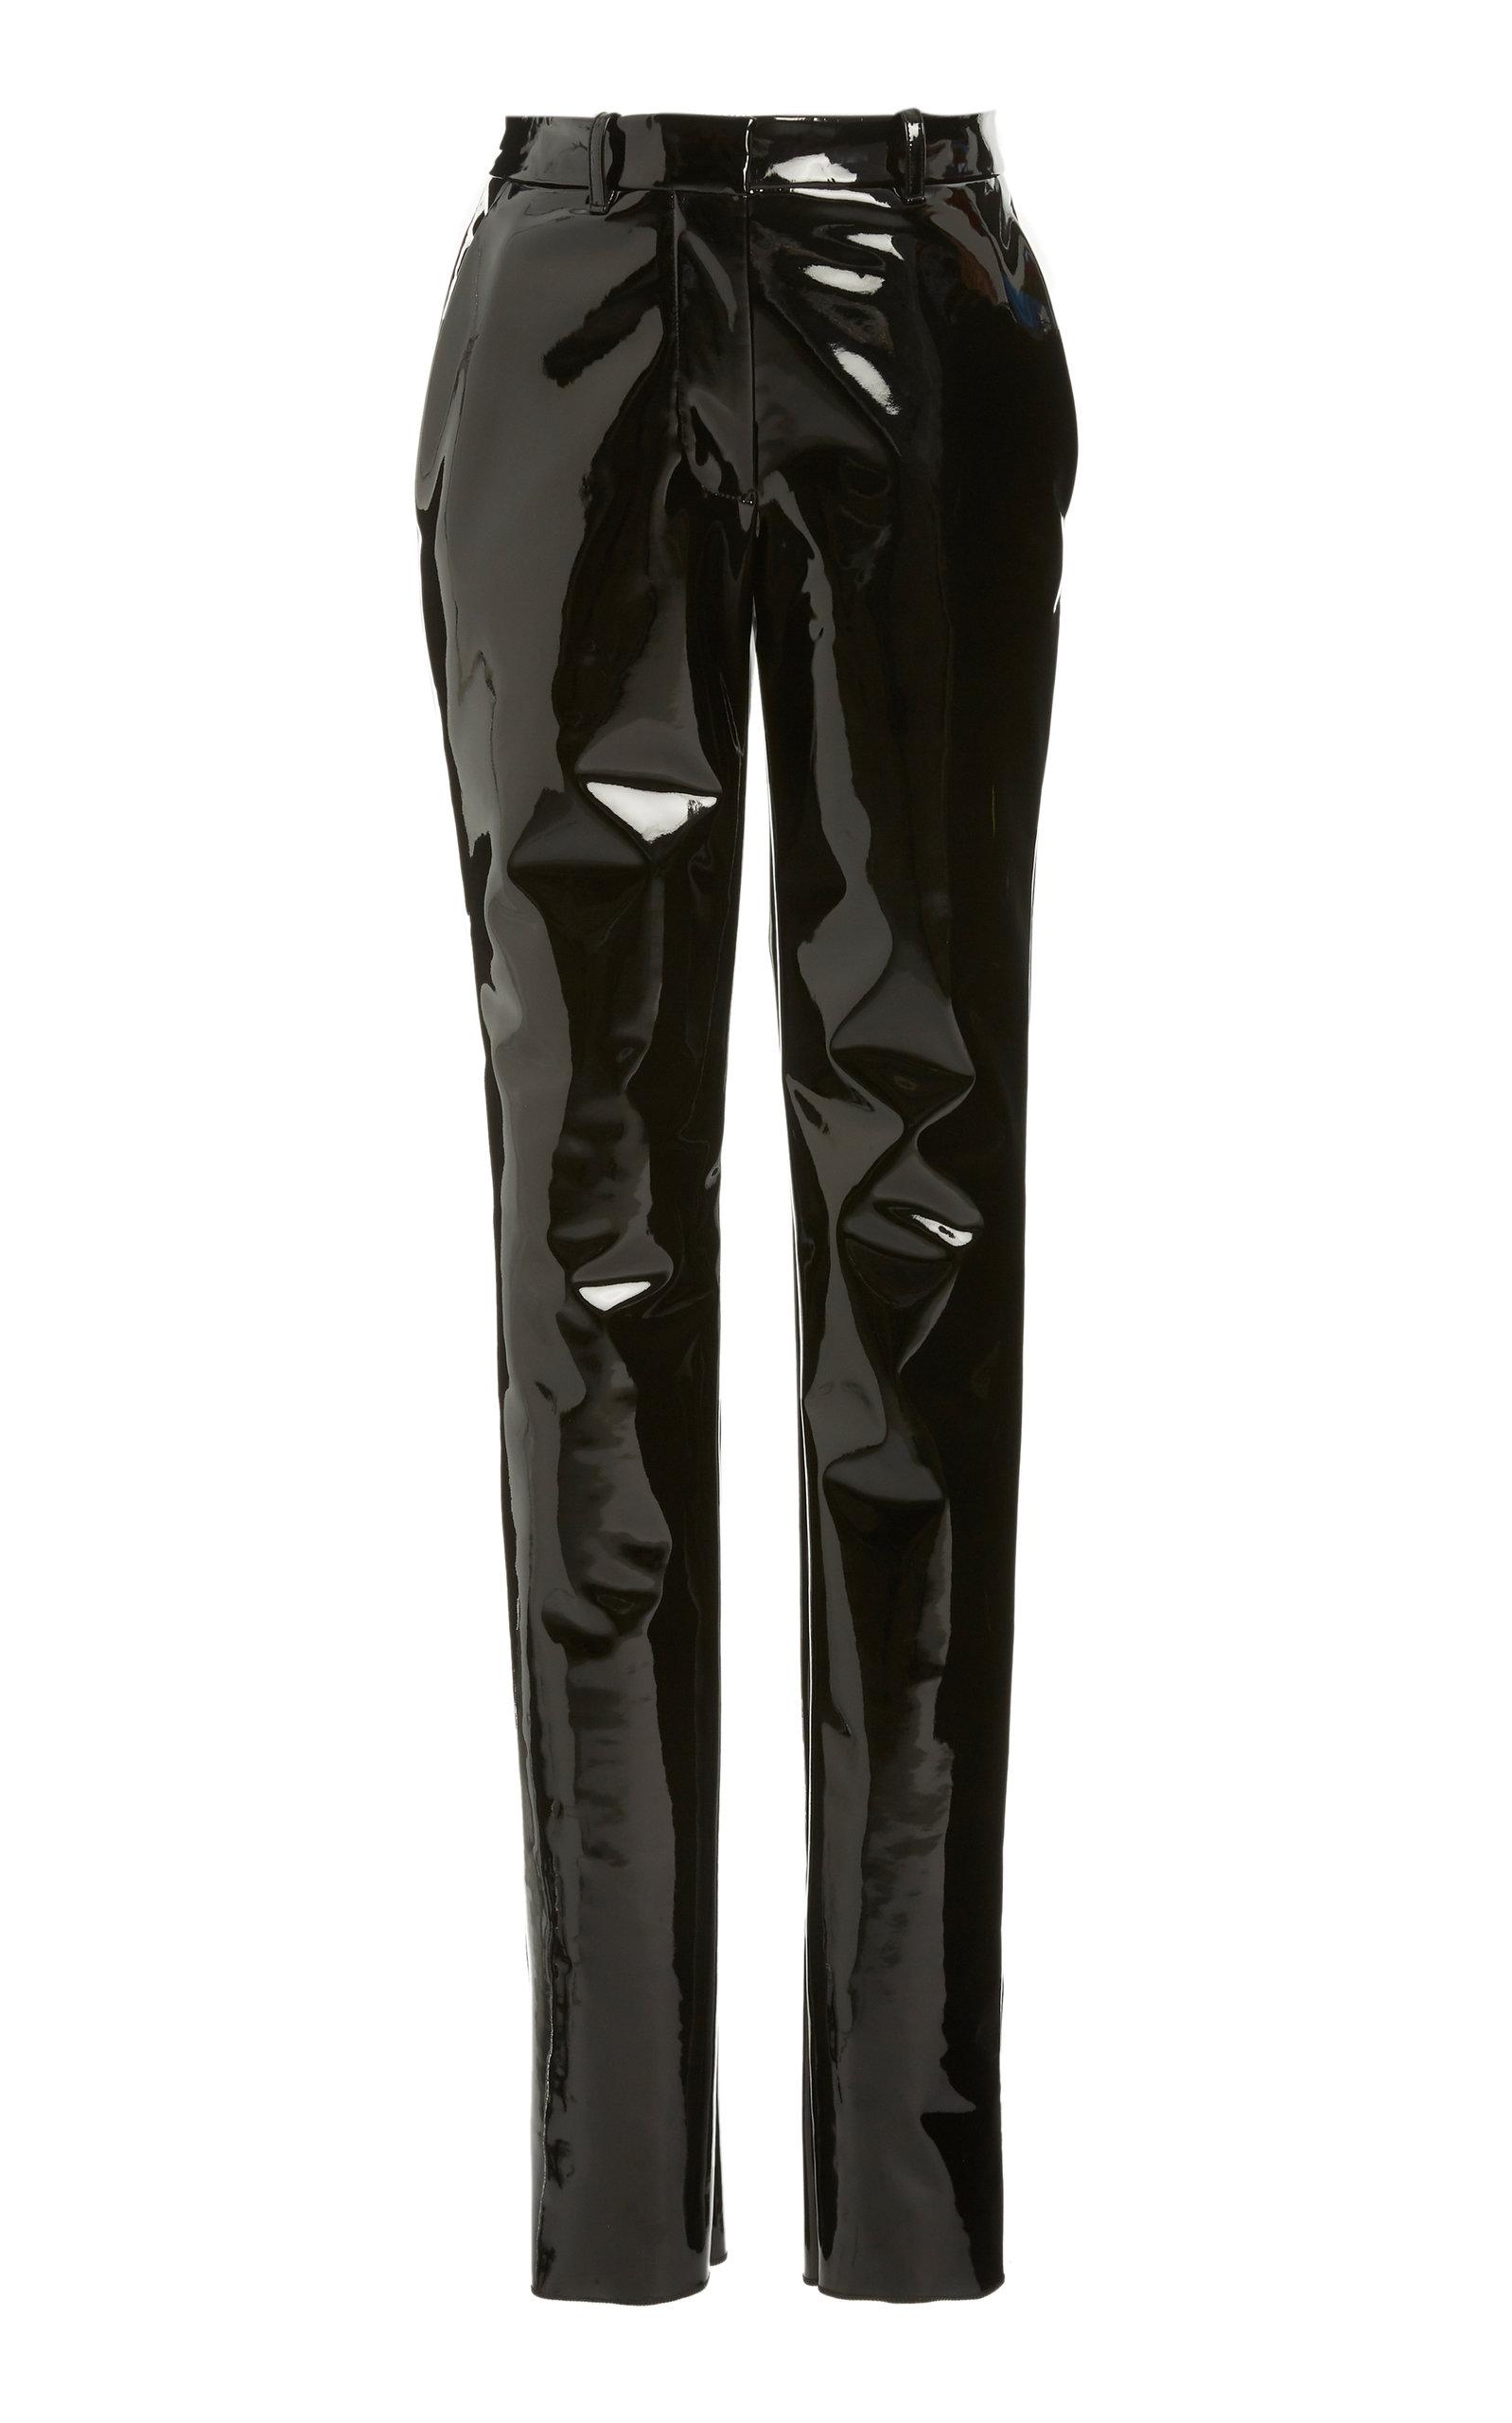 Victoria Beckham Synthetic Pvc High-rise Slim Trousers in Black - Lyst